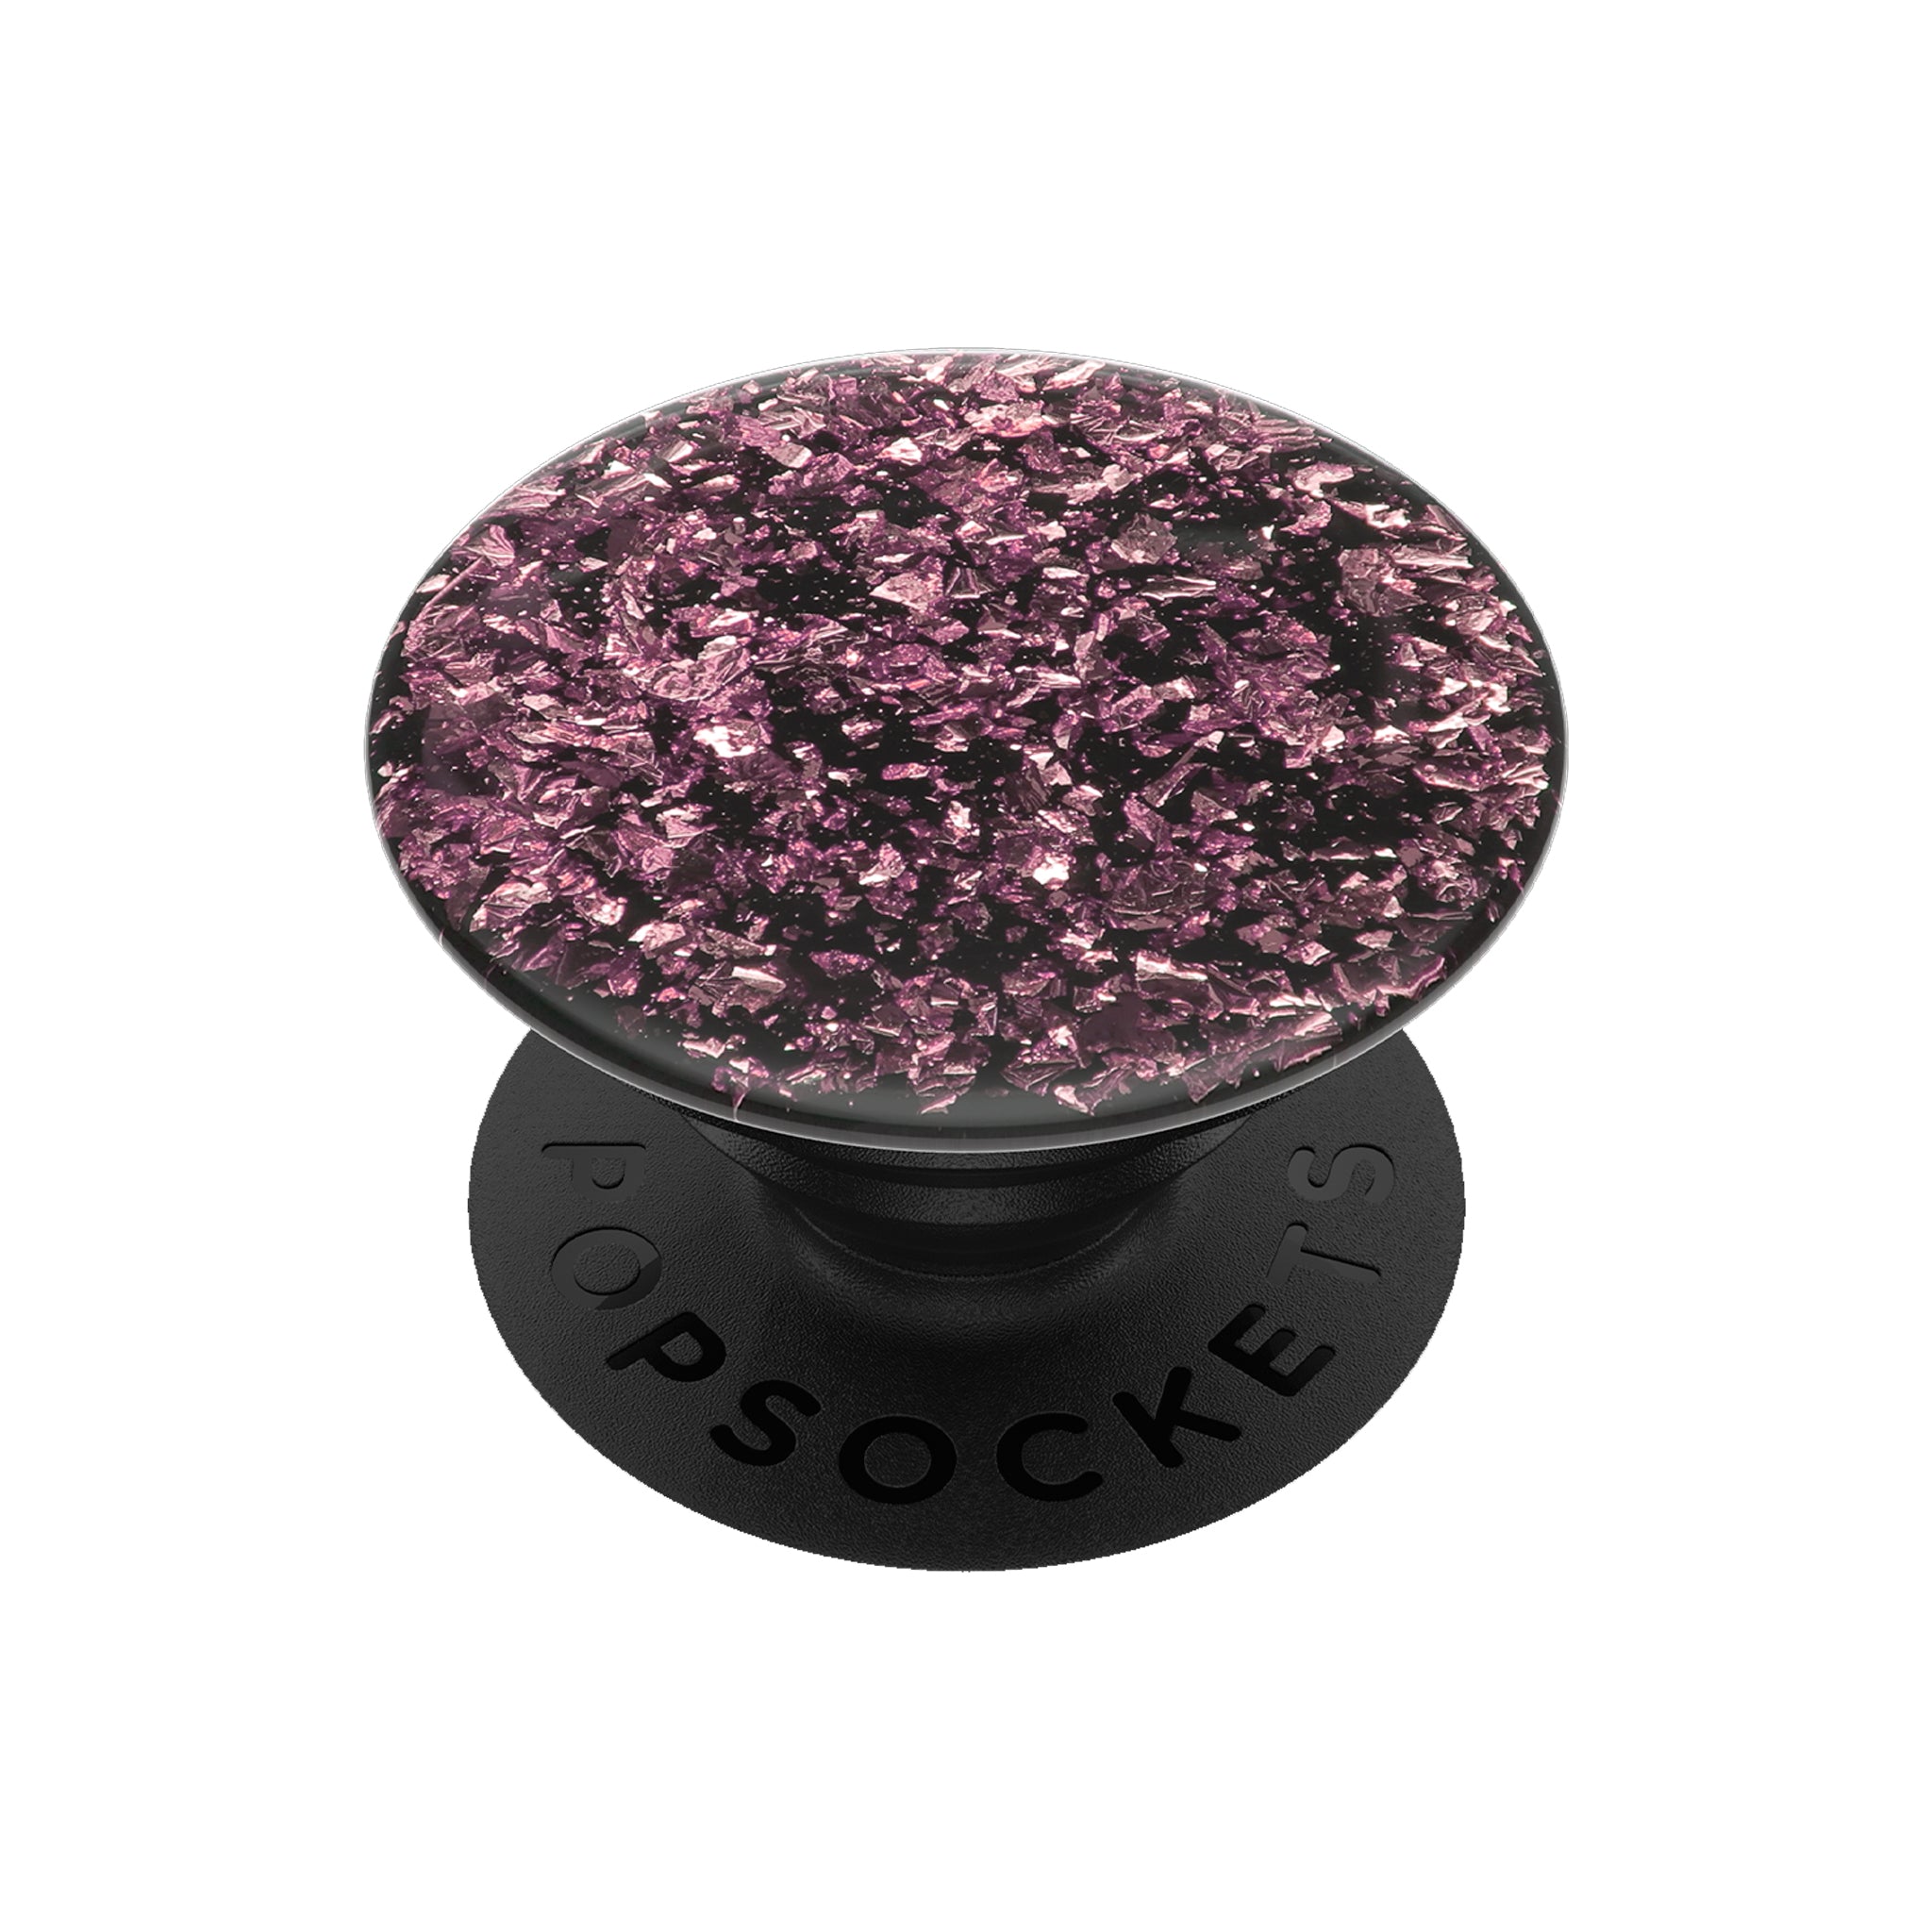 Popsockets - Popgrip Premium Swappable Device Stand And Grip - Foil Confetti Lilac